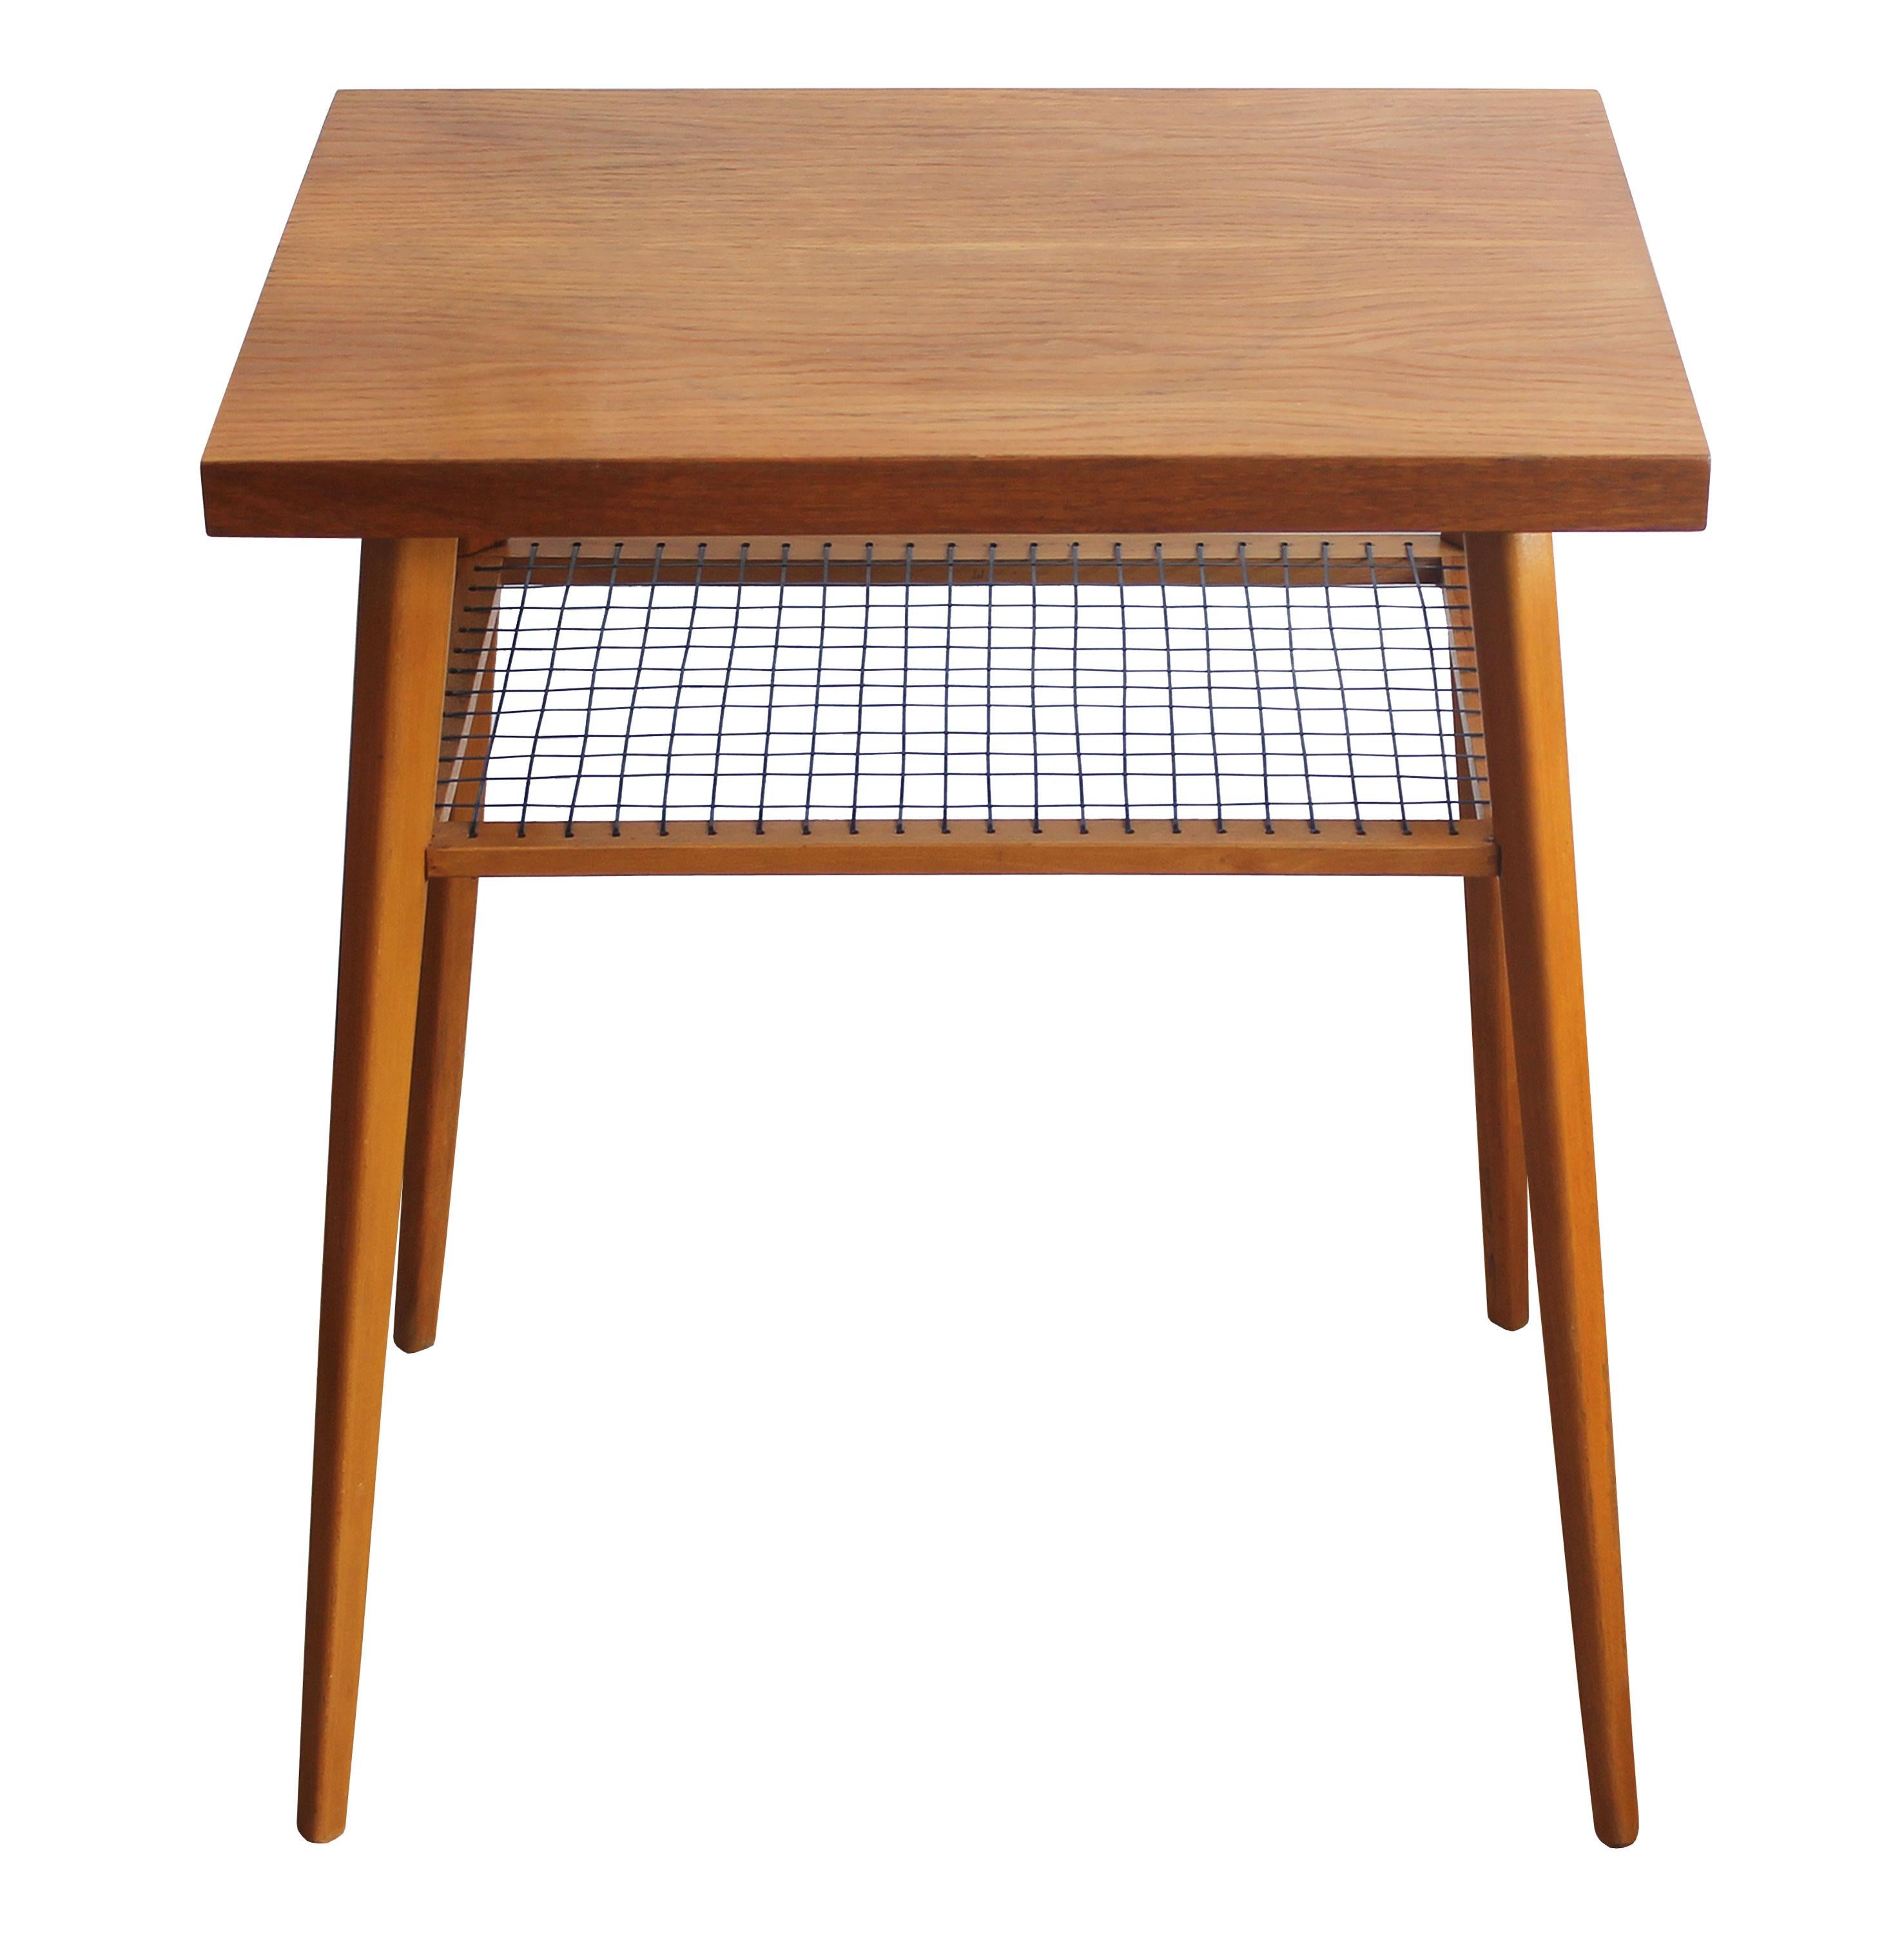 This side table was produced in 1960’s in former Czechoslovakia. It was originally sold as a radio or tv table, with the low shelf (made of navy string) being used for newspaper or magazines. At the time this was a very popular piece of furniture